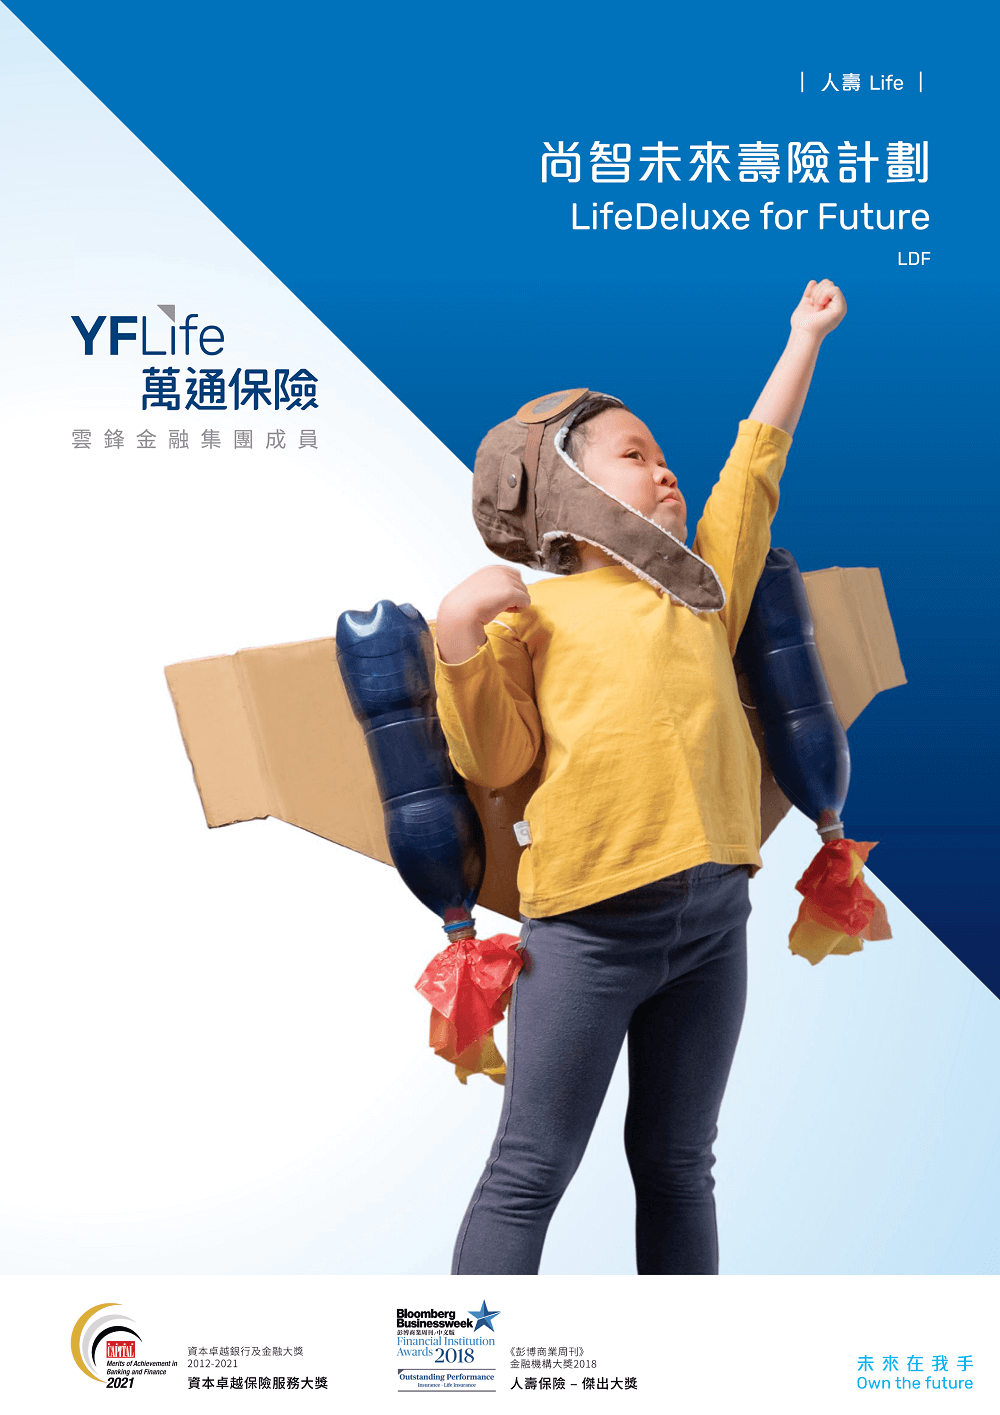 YF Life launches LifeDeluxe for Future, a plan tailored for children.